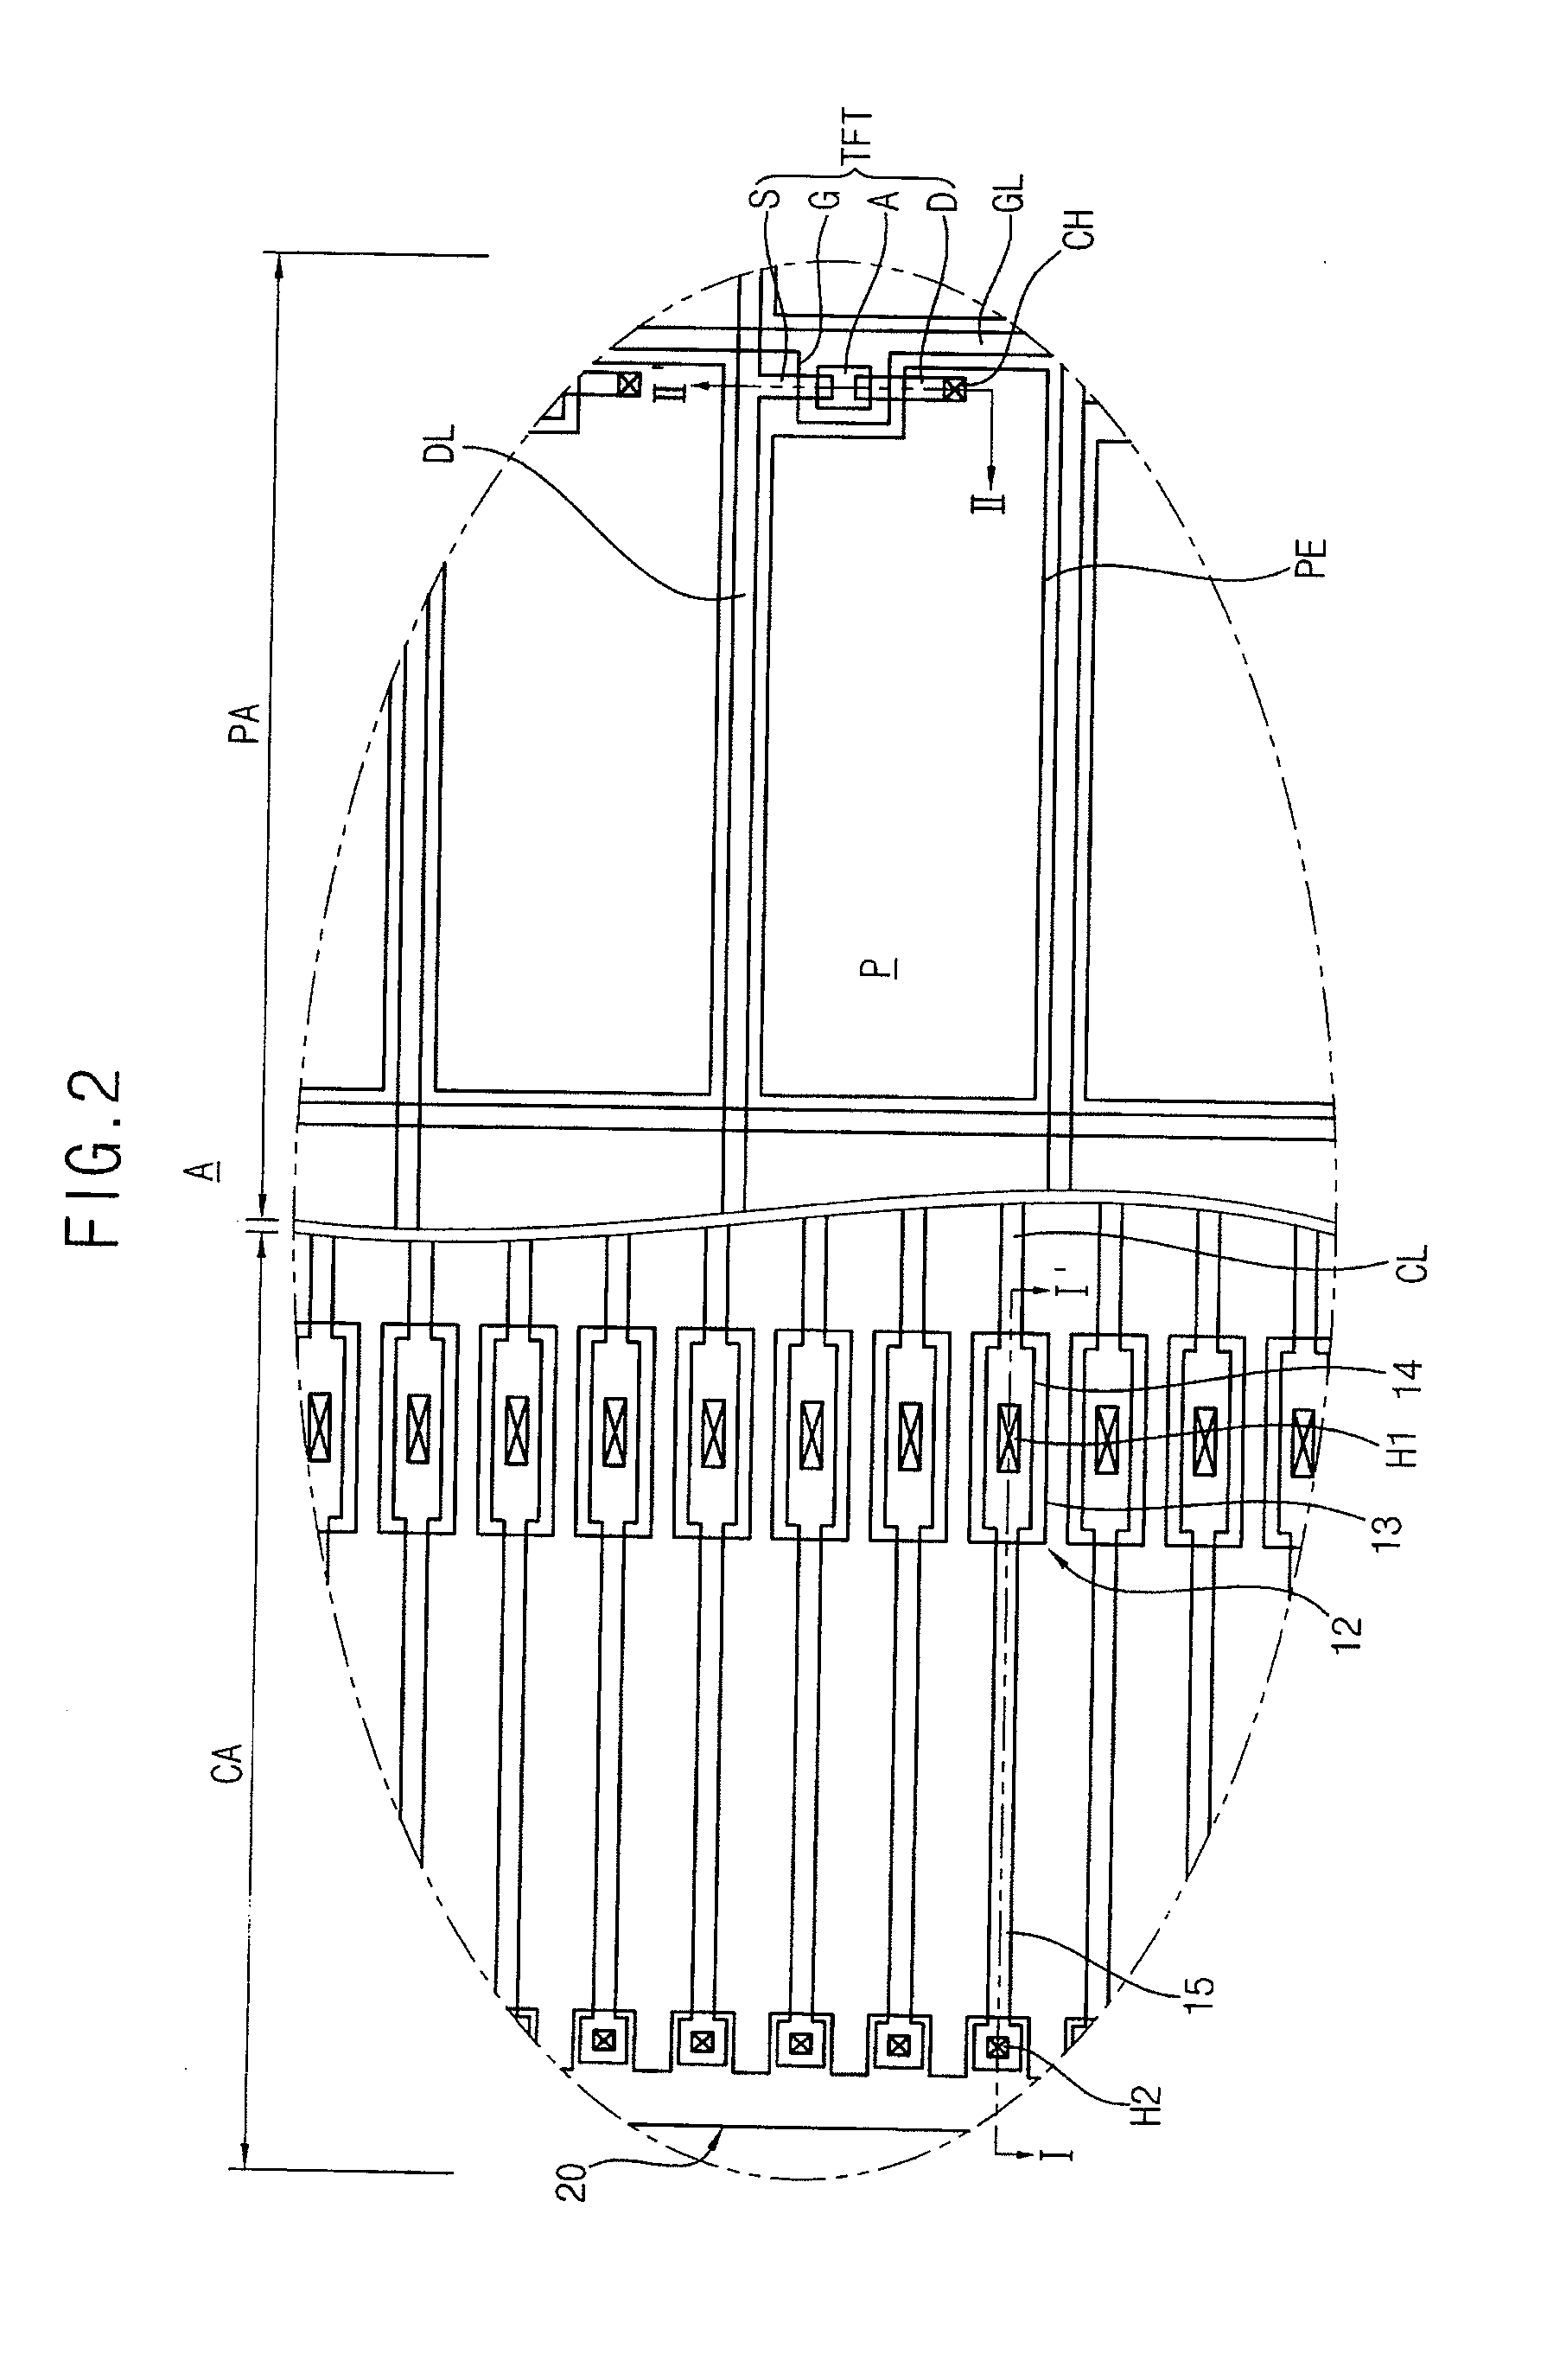 Display substrate, method for manufacturing the same, and display apparatus having the same